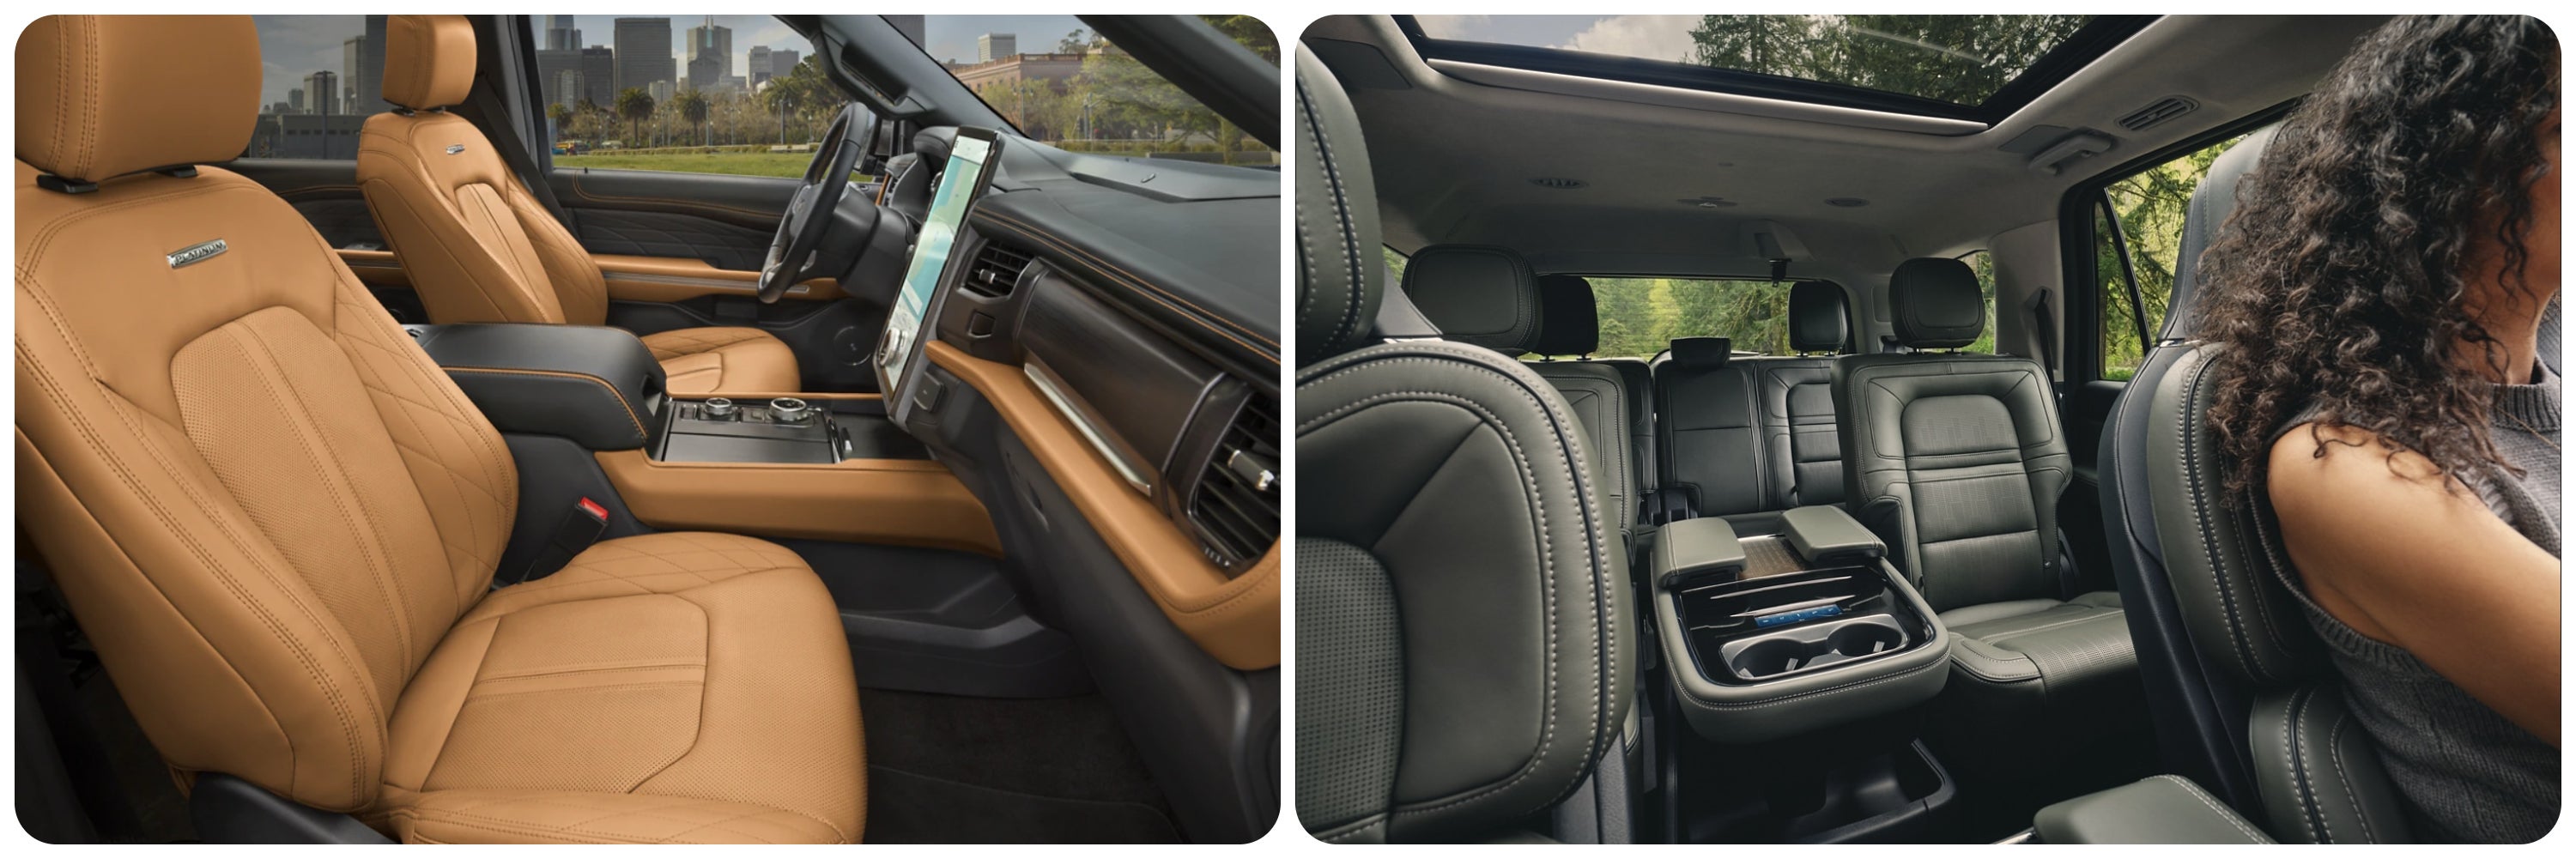 On the left a view of the interior cabin and seating of a 2023 Ford Explorer, on the right a similar view of the 2023 Lincoln Navigator